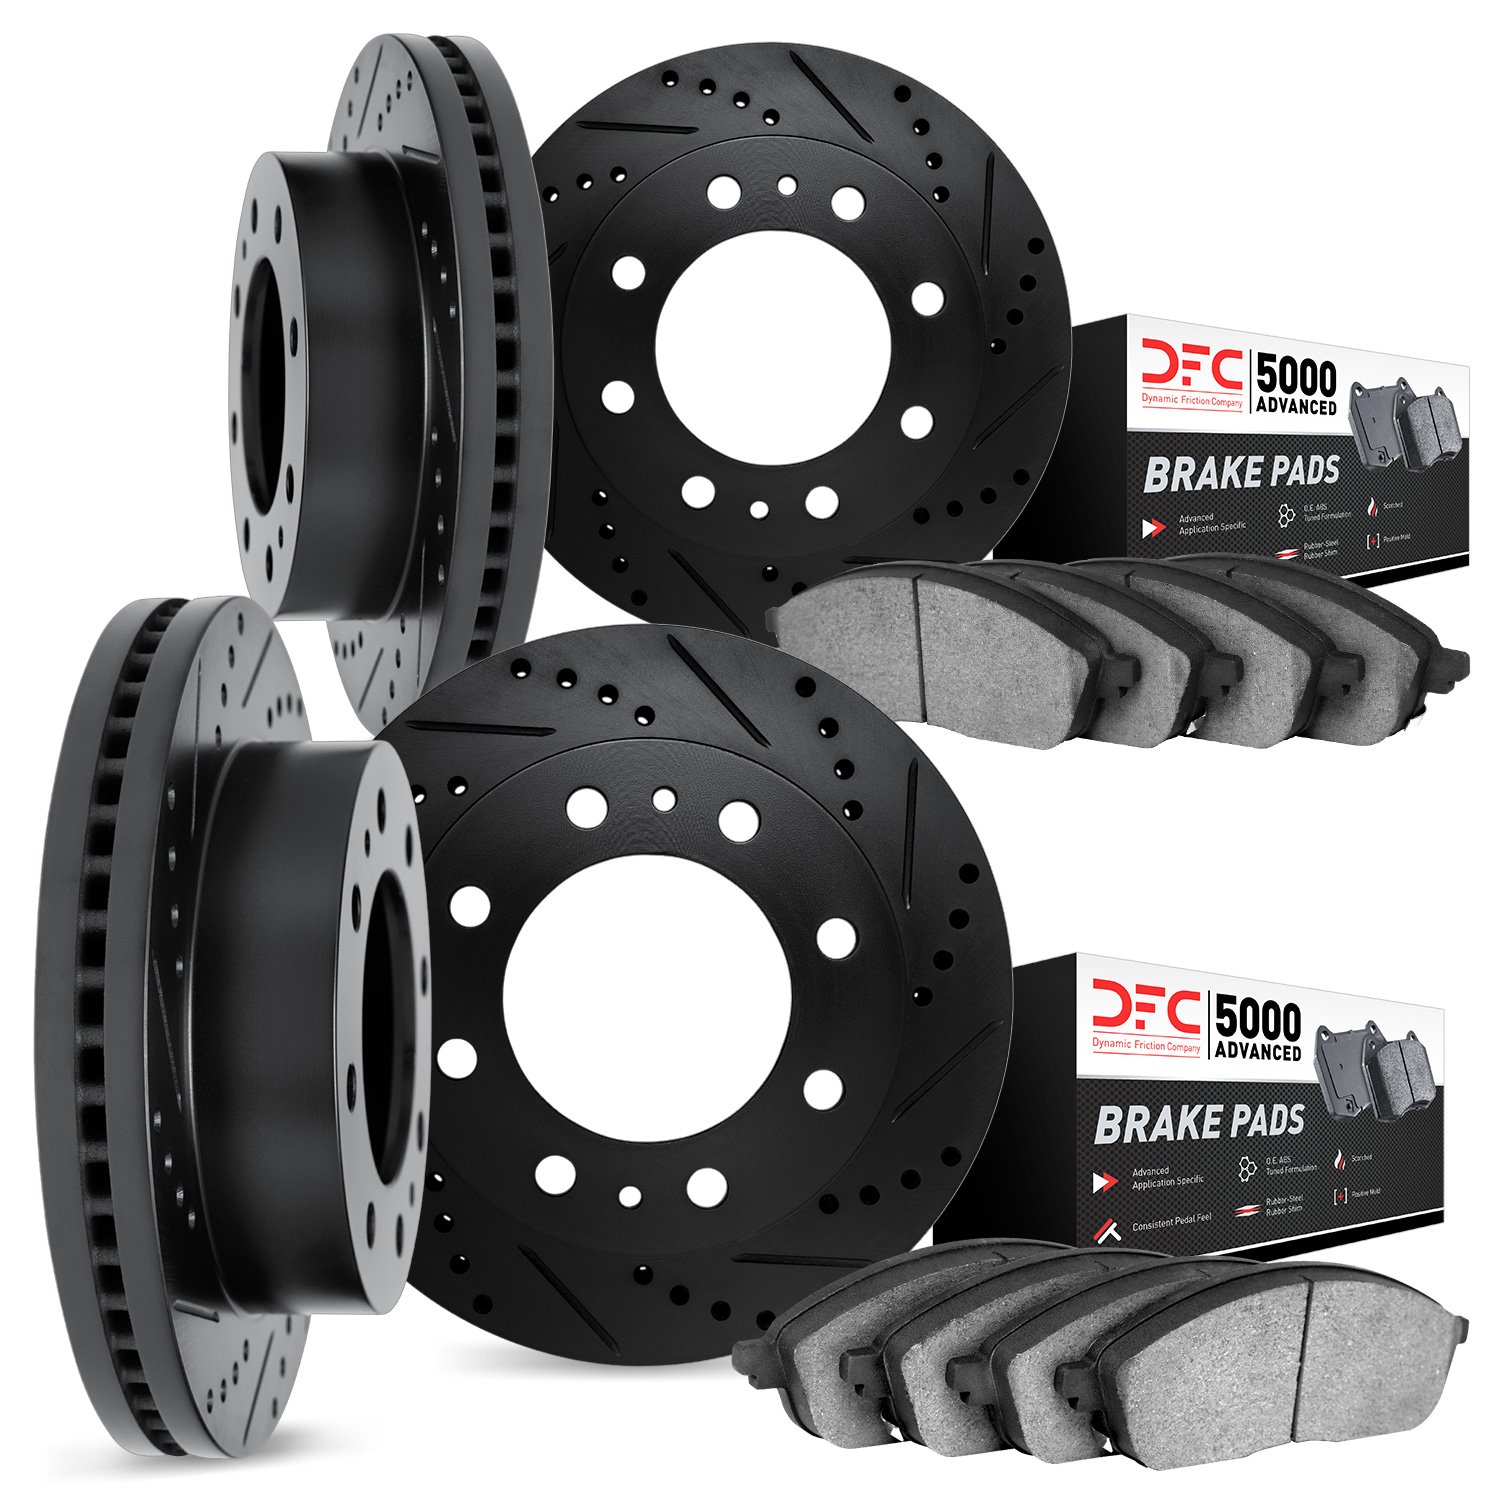 8504-46012 Drilled/Slotted Brake Rotors w/5000 Advanced Brake Pads Kit [Black], 2000-2005 GM, Position: Front and Rear